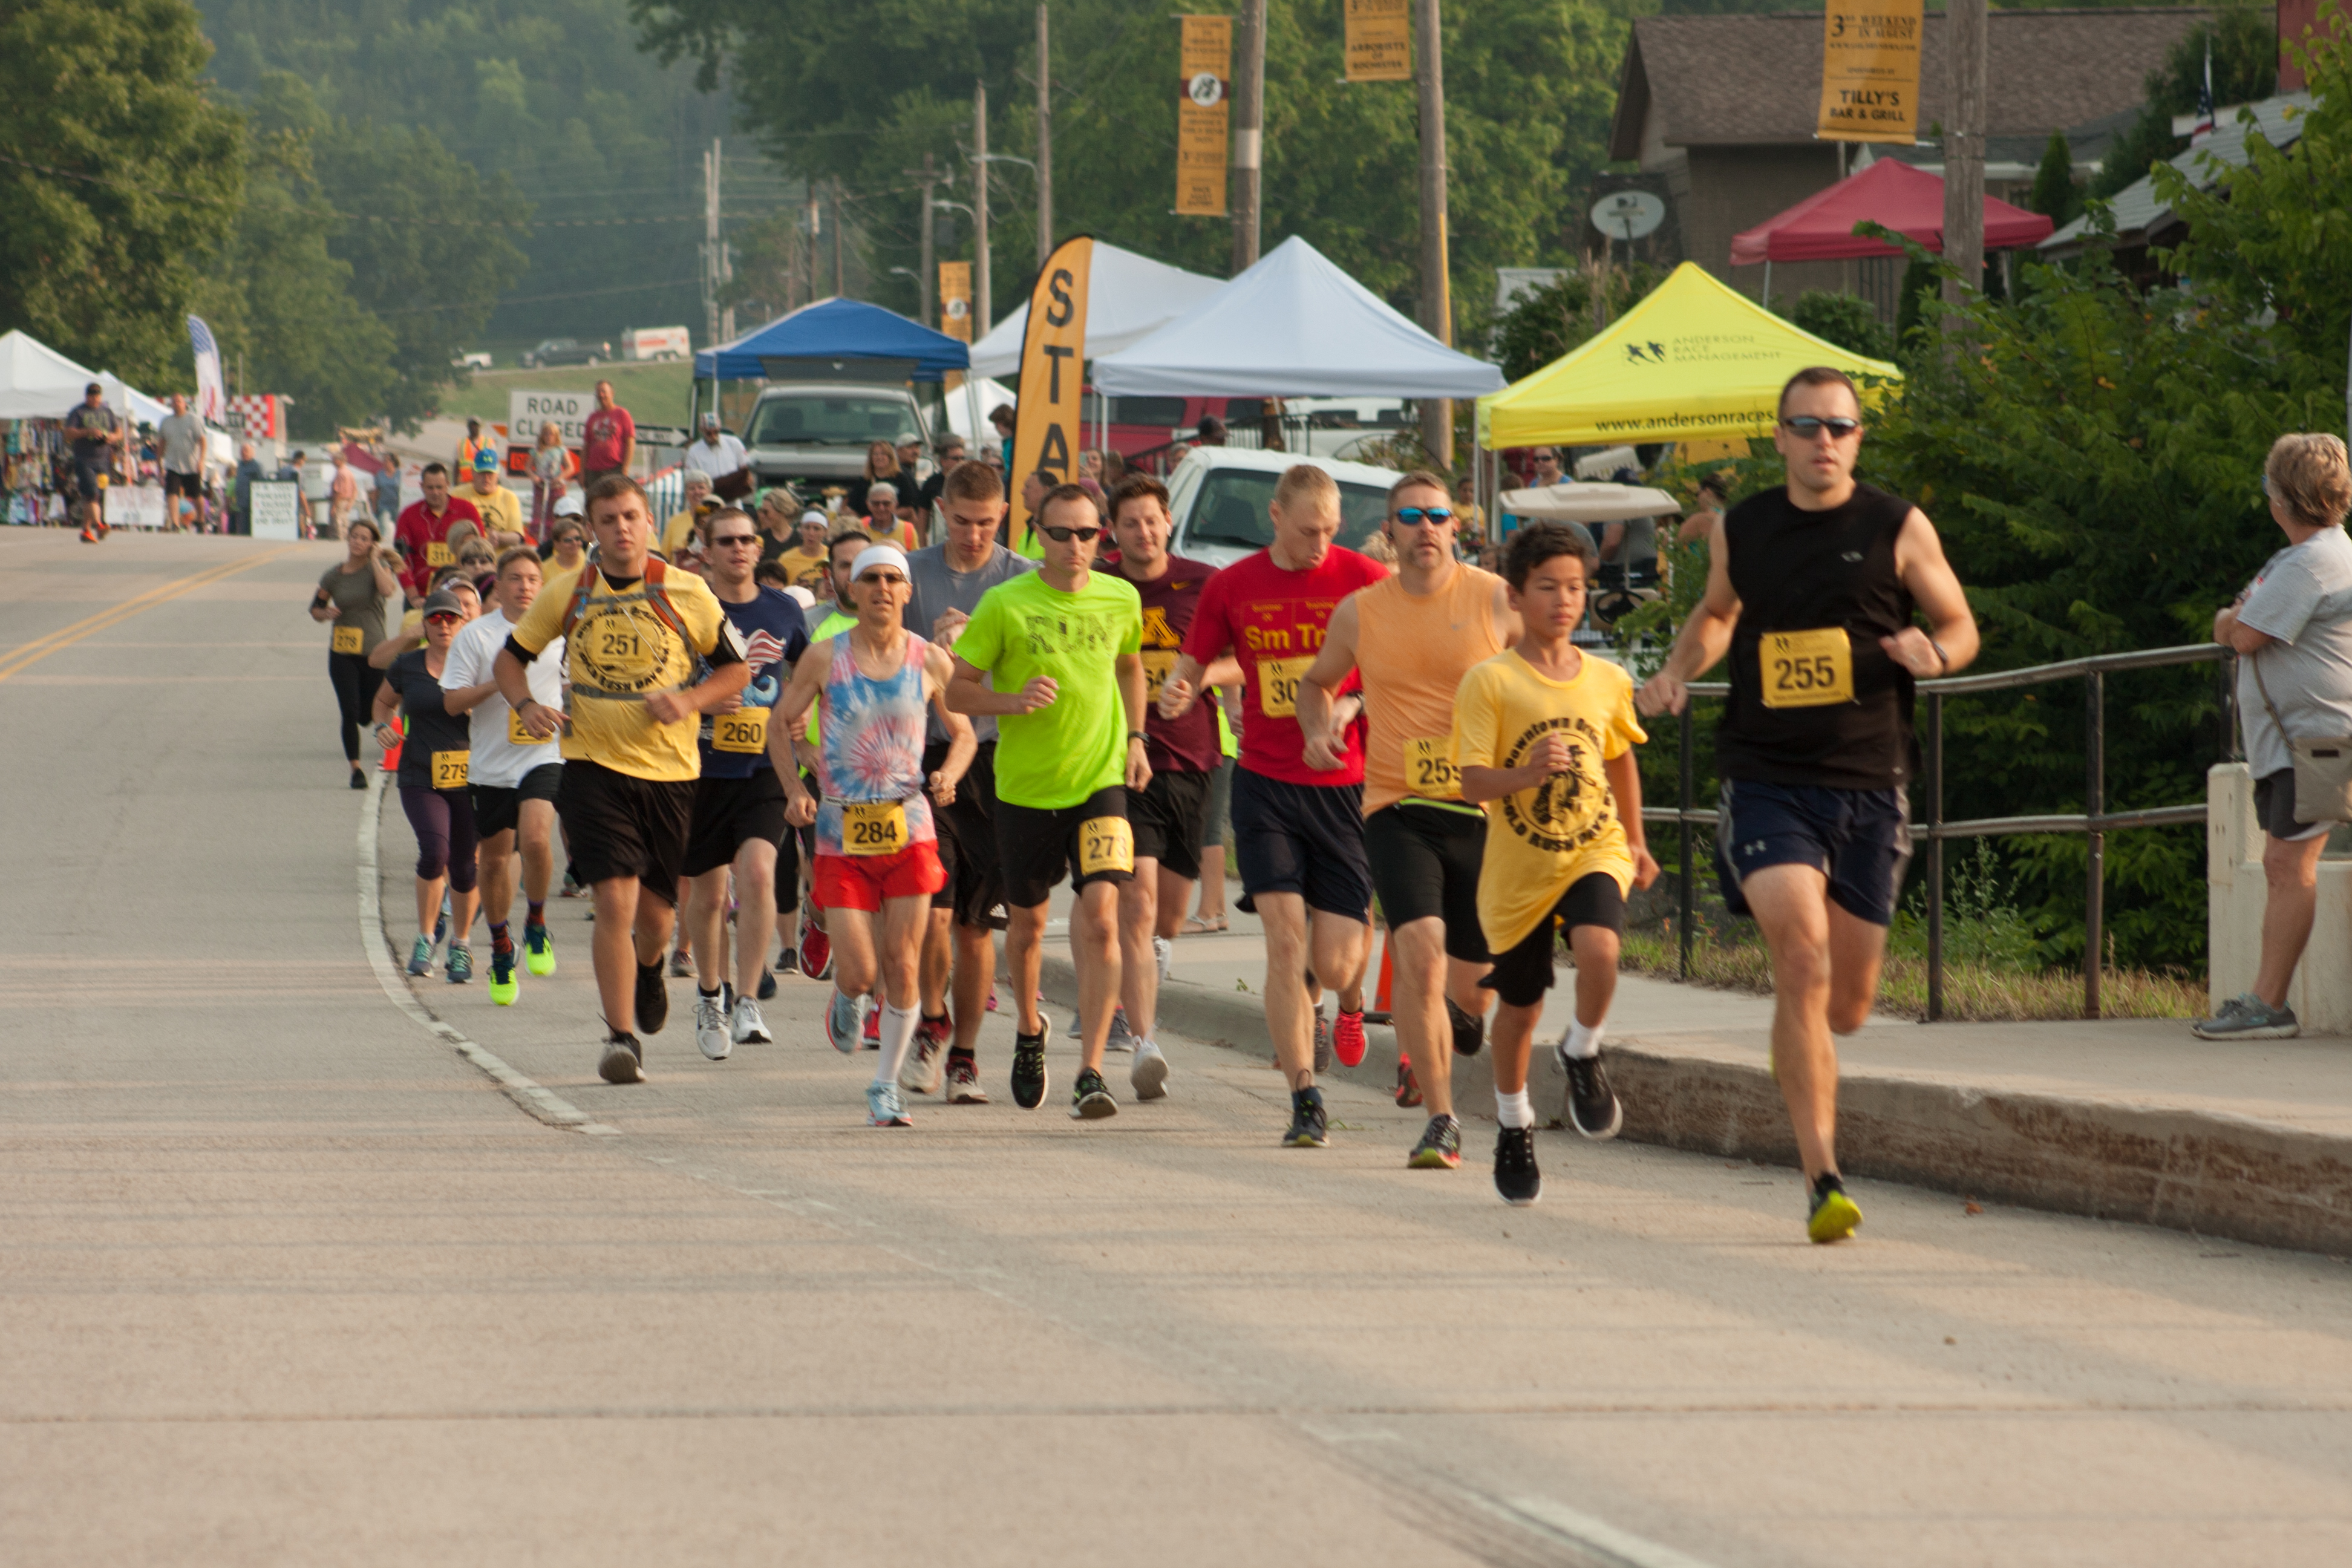 Photos from the 2018 Gold Rush Event are available Downtown Oronoco